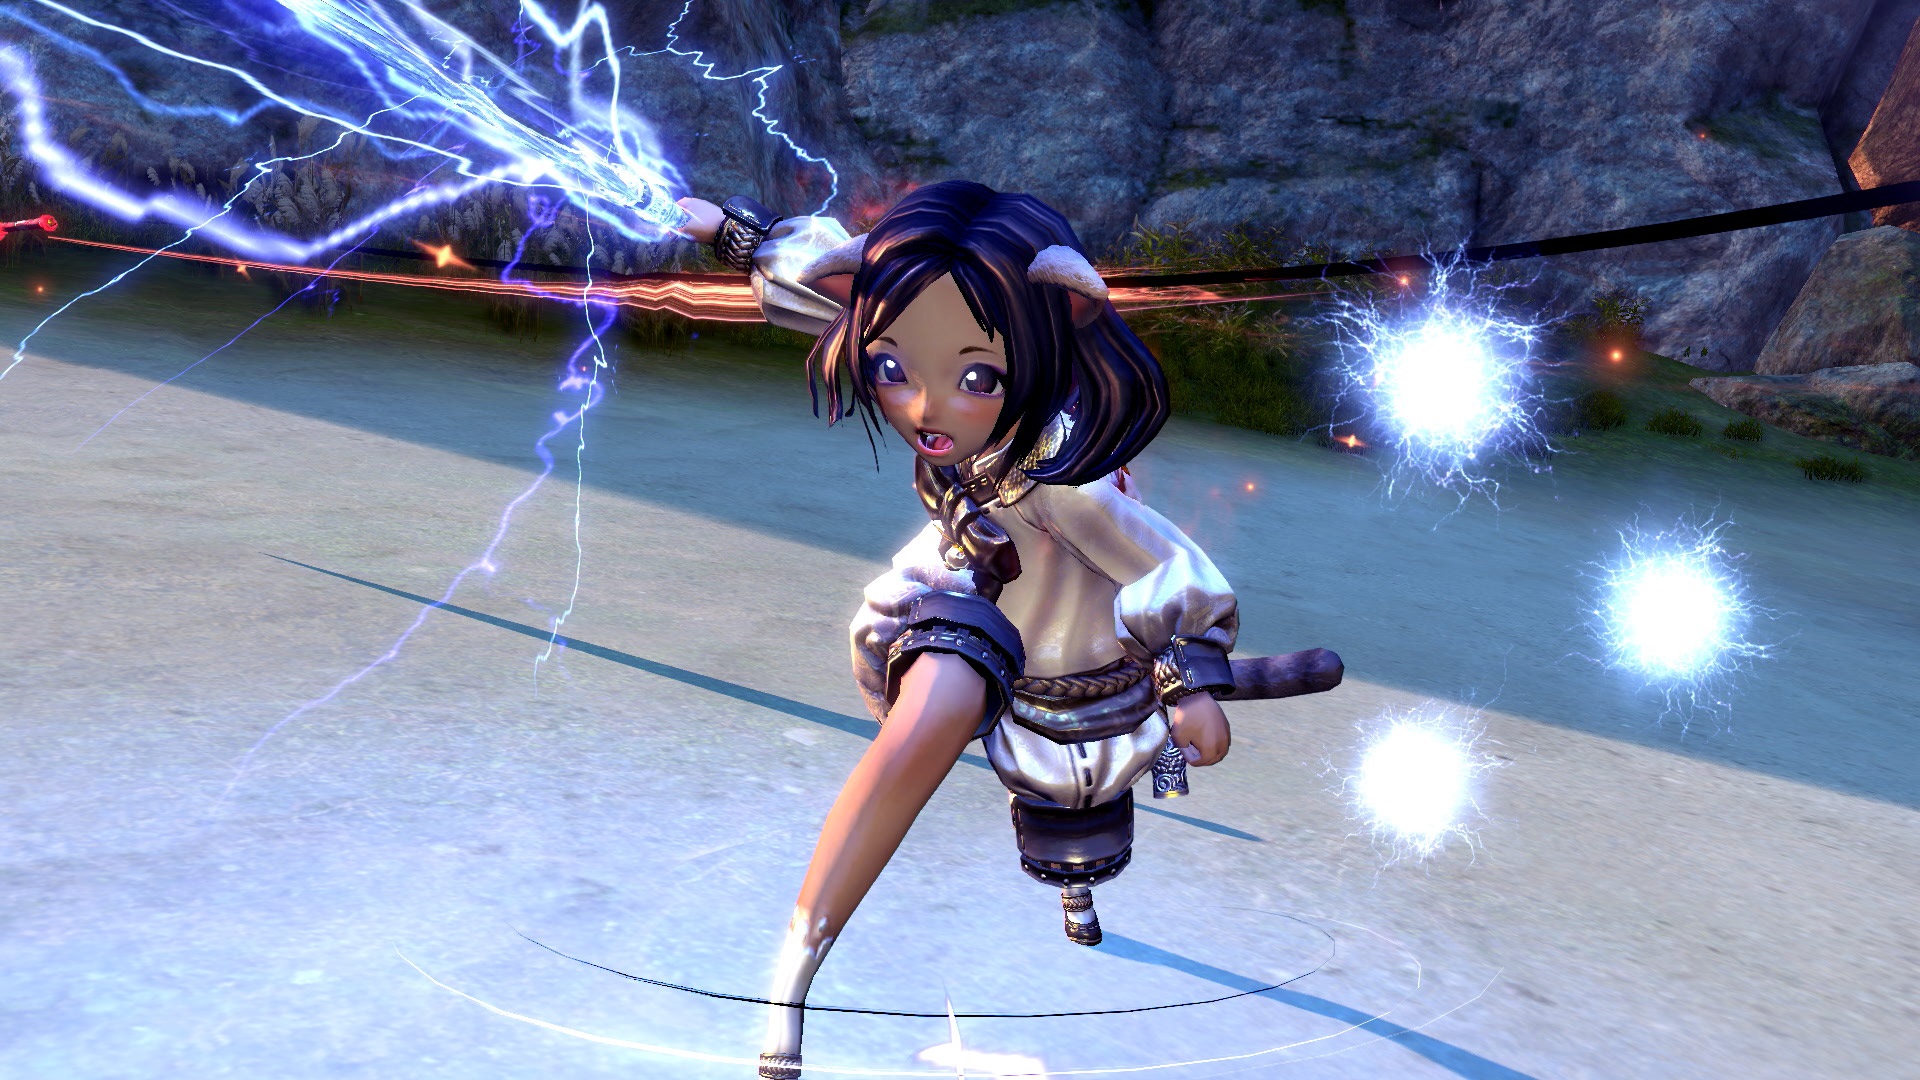 Download game blade and soul pc download